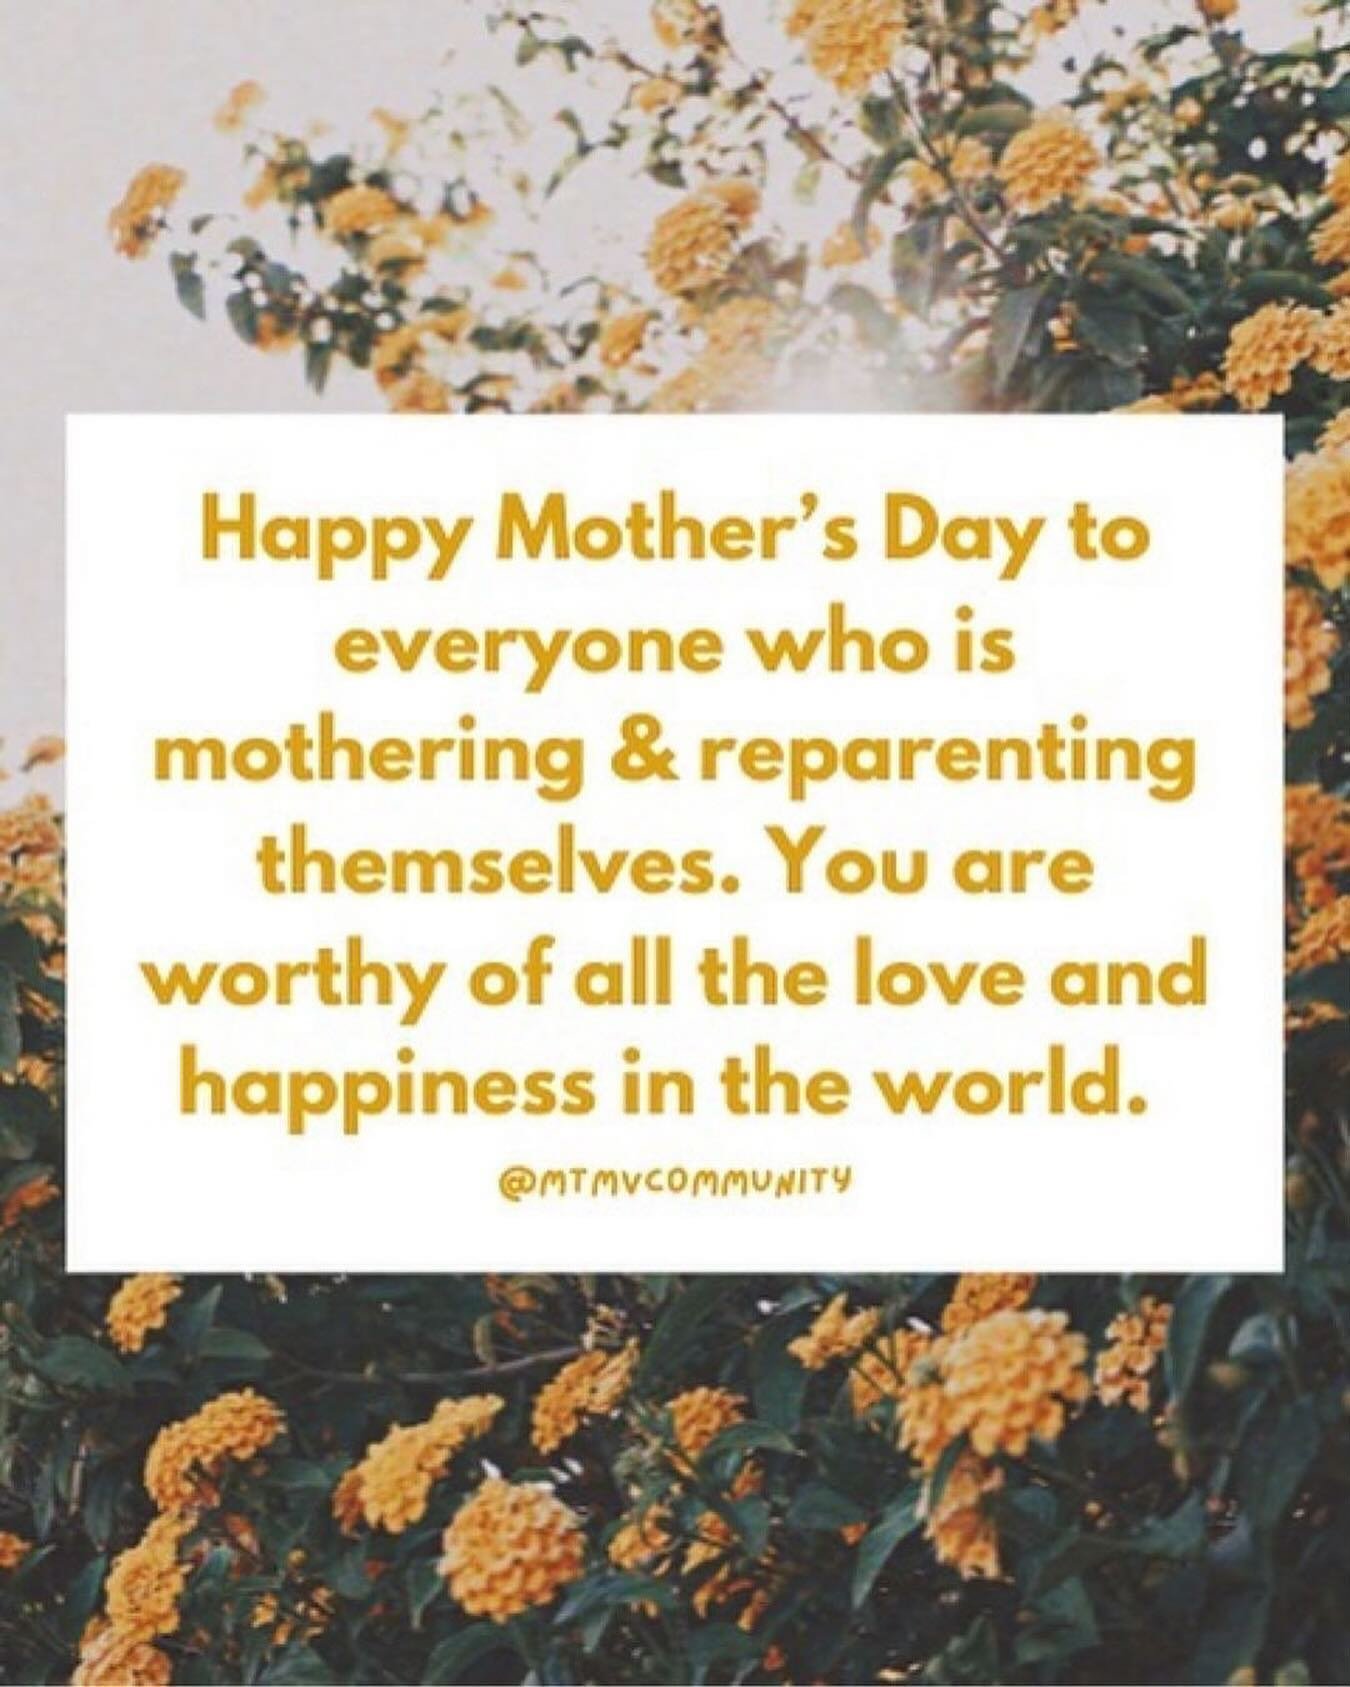 Happy Mother&rsquo;s Day to everyone who is mothering &amp; reparenting themselves. You are worthy of all the love and happiness in the world. 💛🌻

[Image description: above in yellow text on a white square over a picture of yellow flowers.]